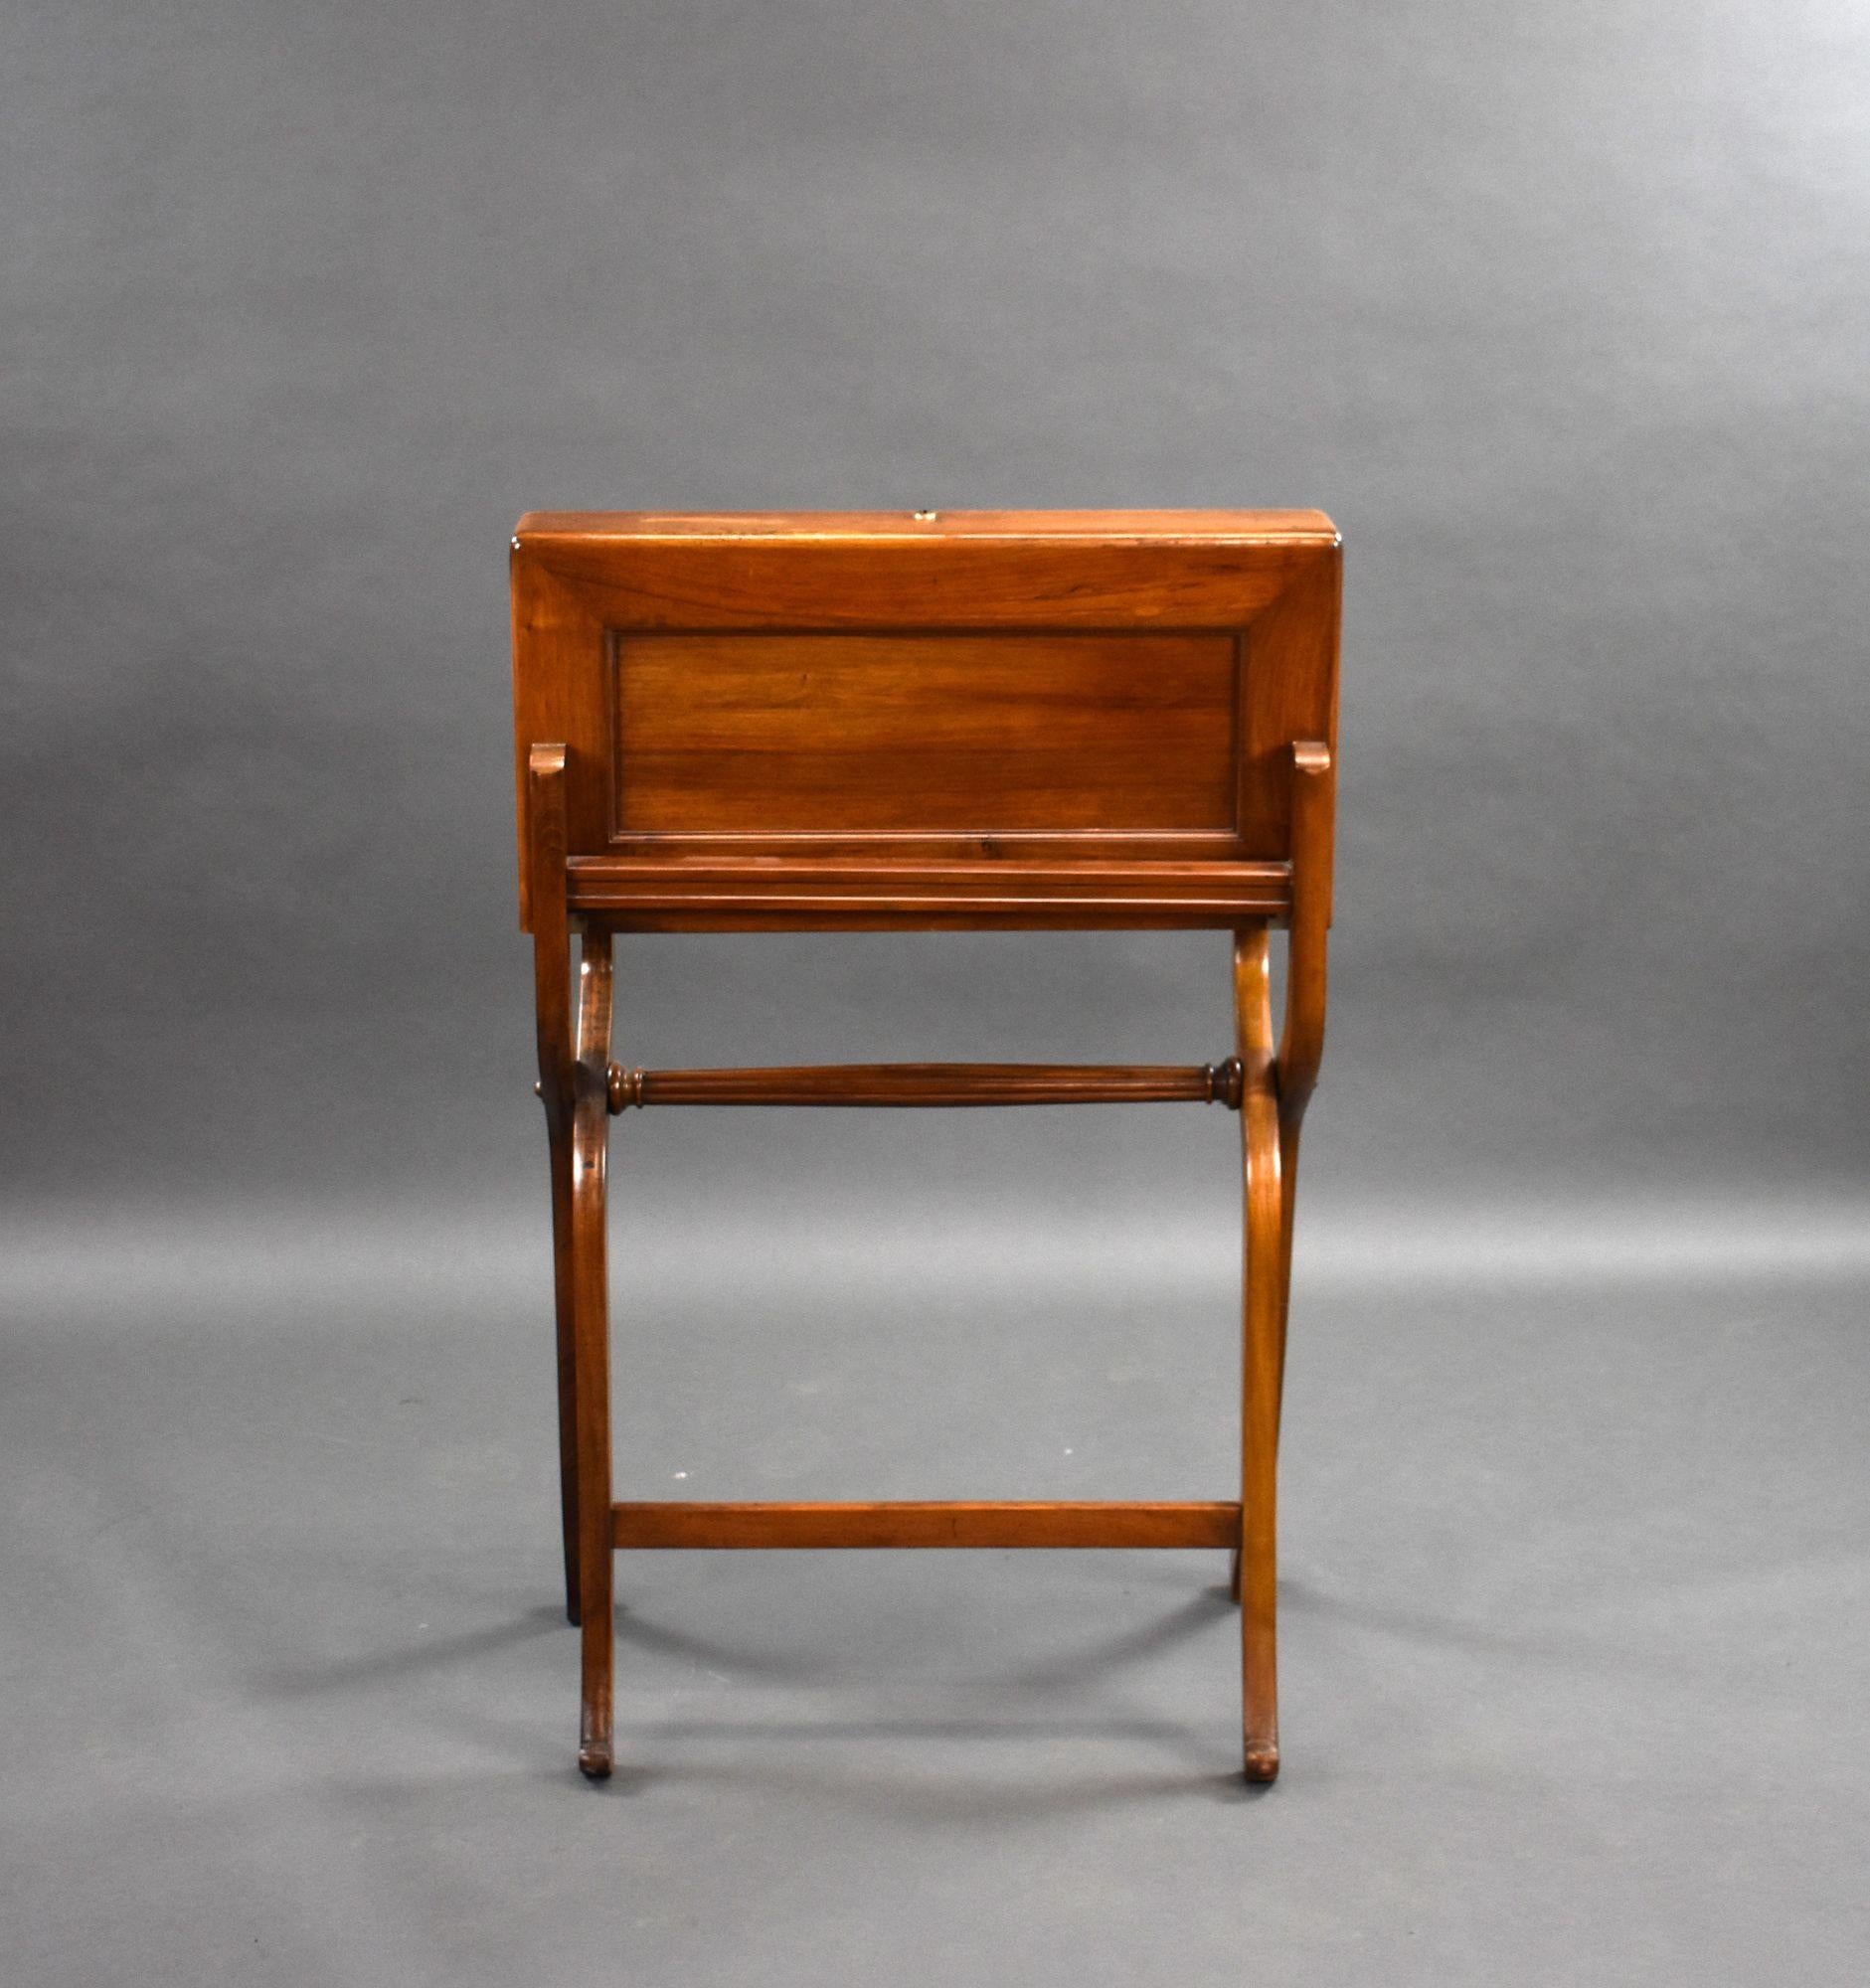 For sale is a good quality Victorian walnut campaign travelling desk, opening to a maroon leather interior, the frame remains in very good condition for its age. The original interior is quite worn, please see pictures. 
 
Closed = Width: 62cm